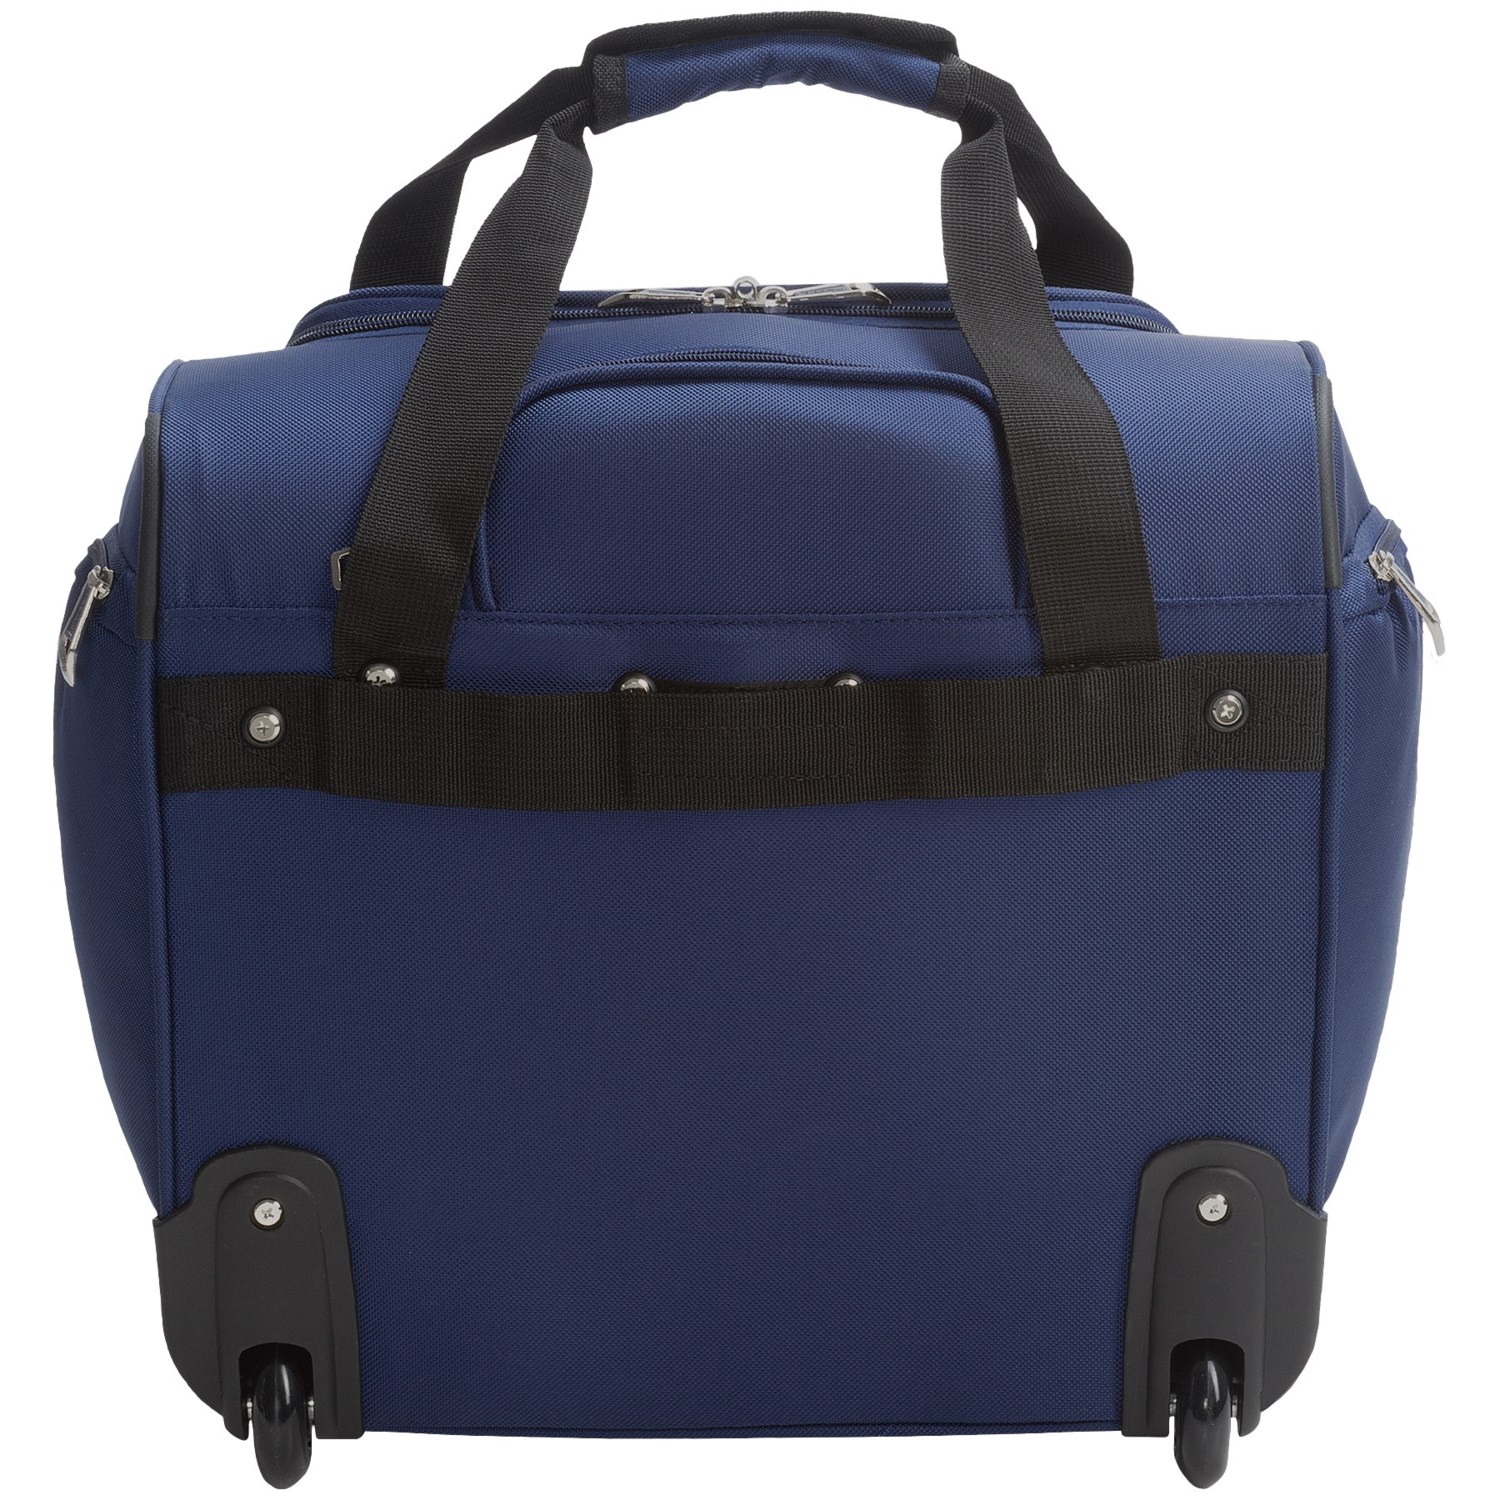 Travelpro Sapphire Elite Rolling Under-Seat Bag - 15” - Save 53%